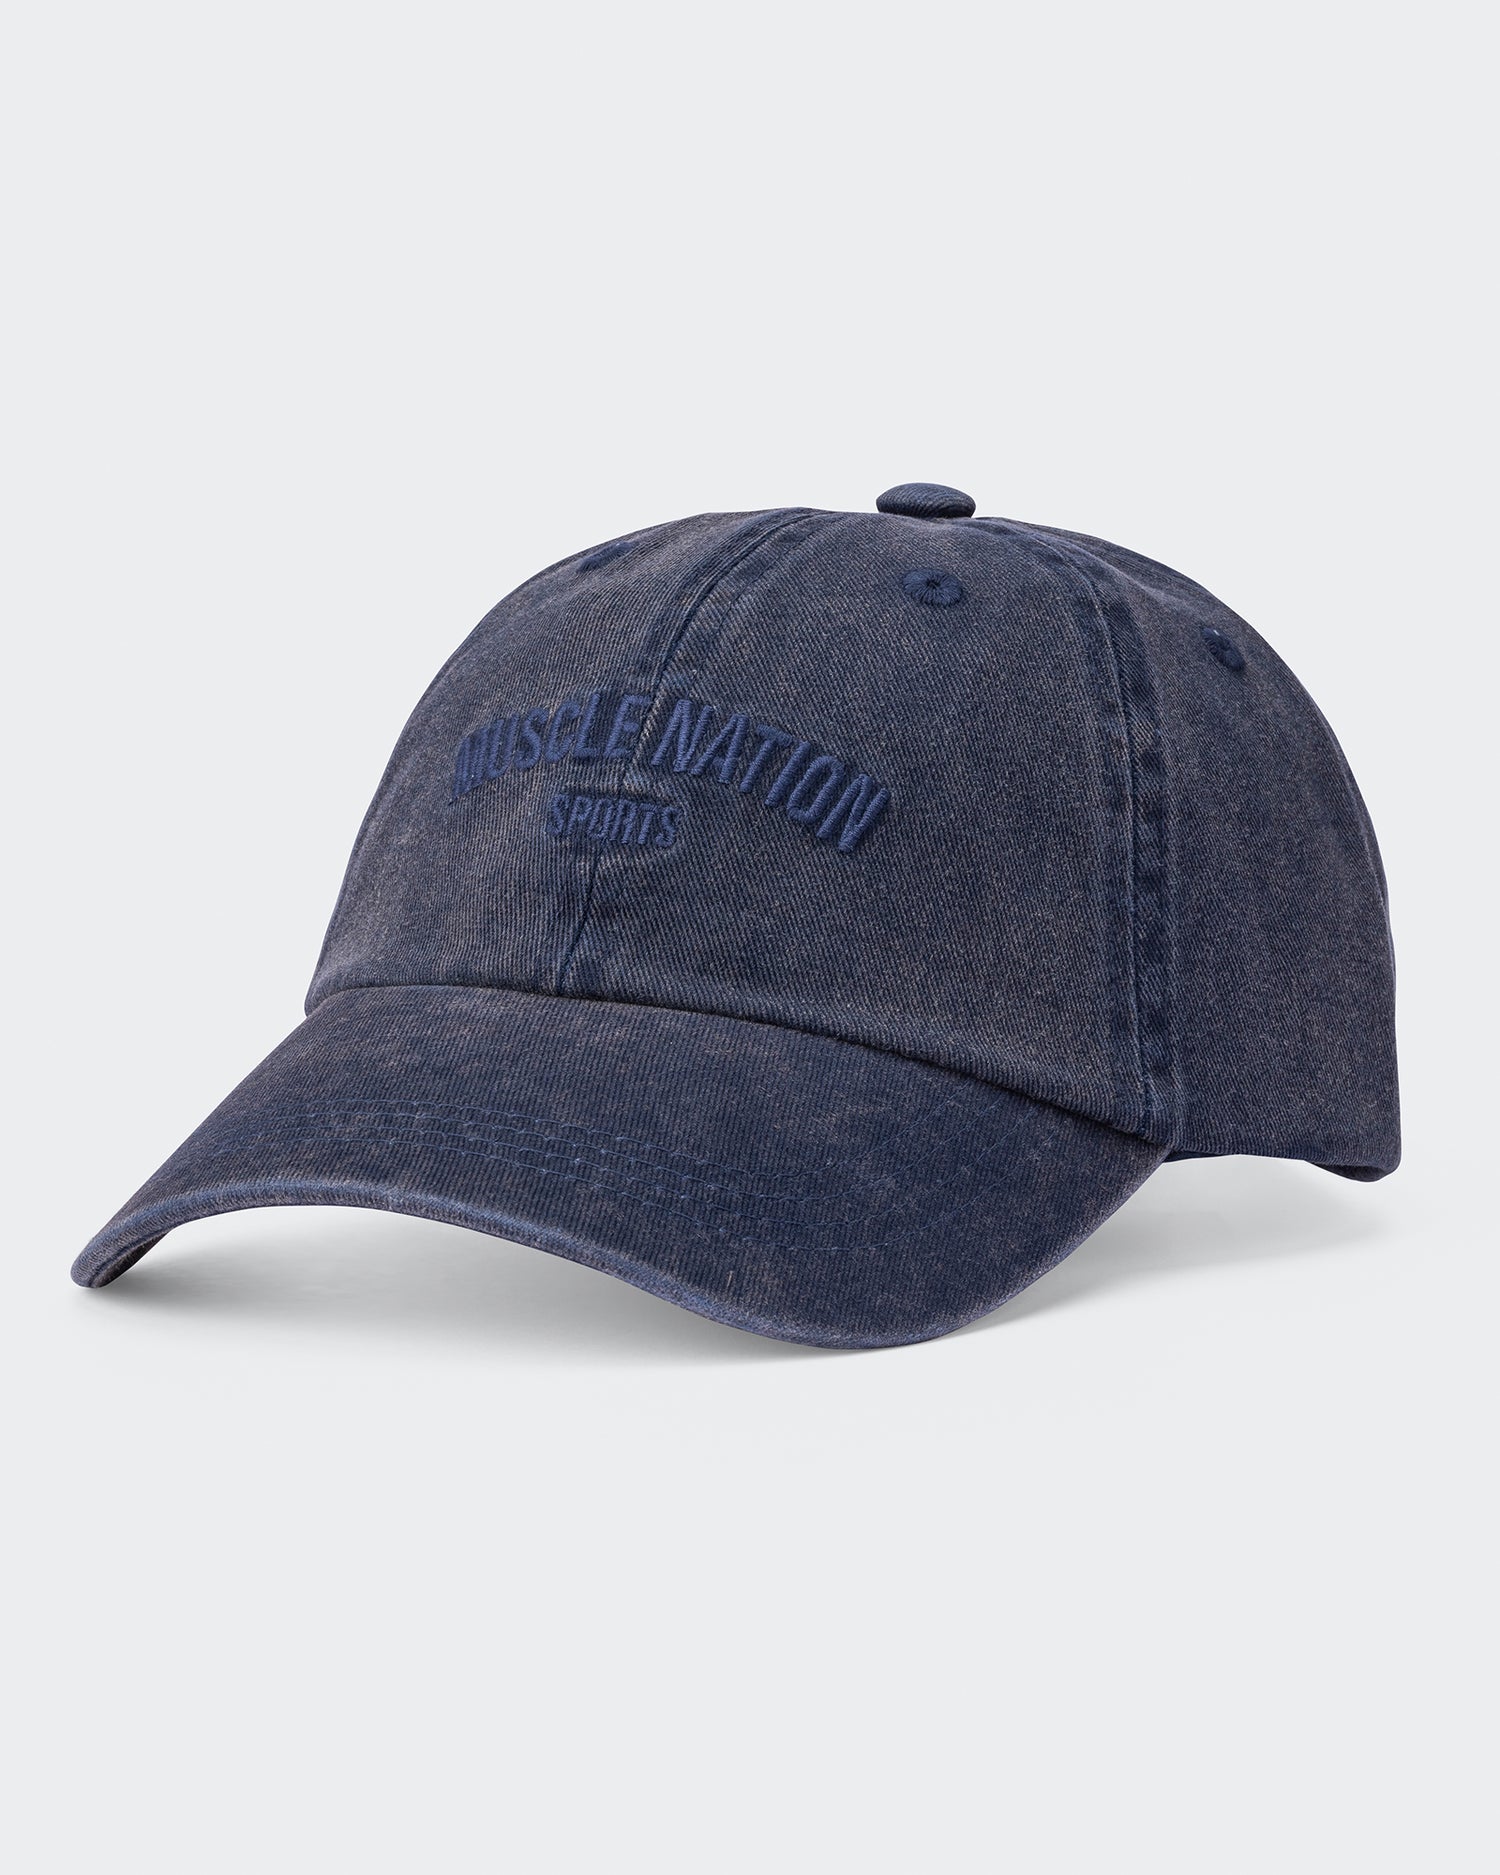 Distressed Dad Cap - Muscle Nation